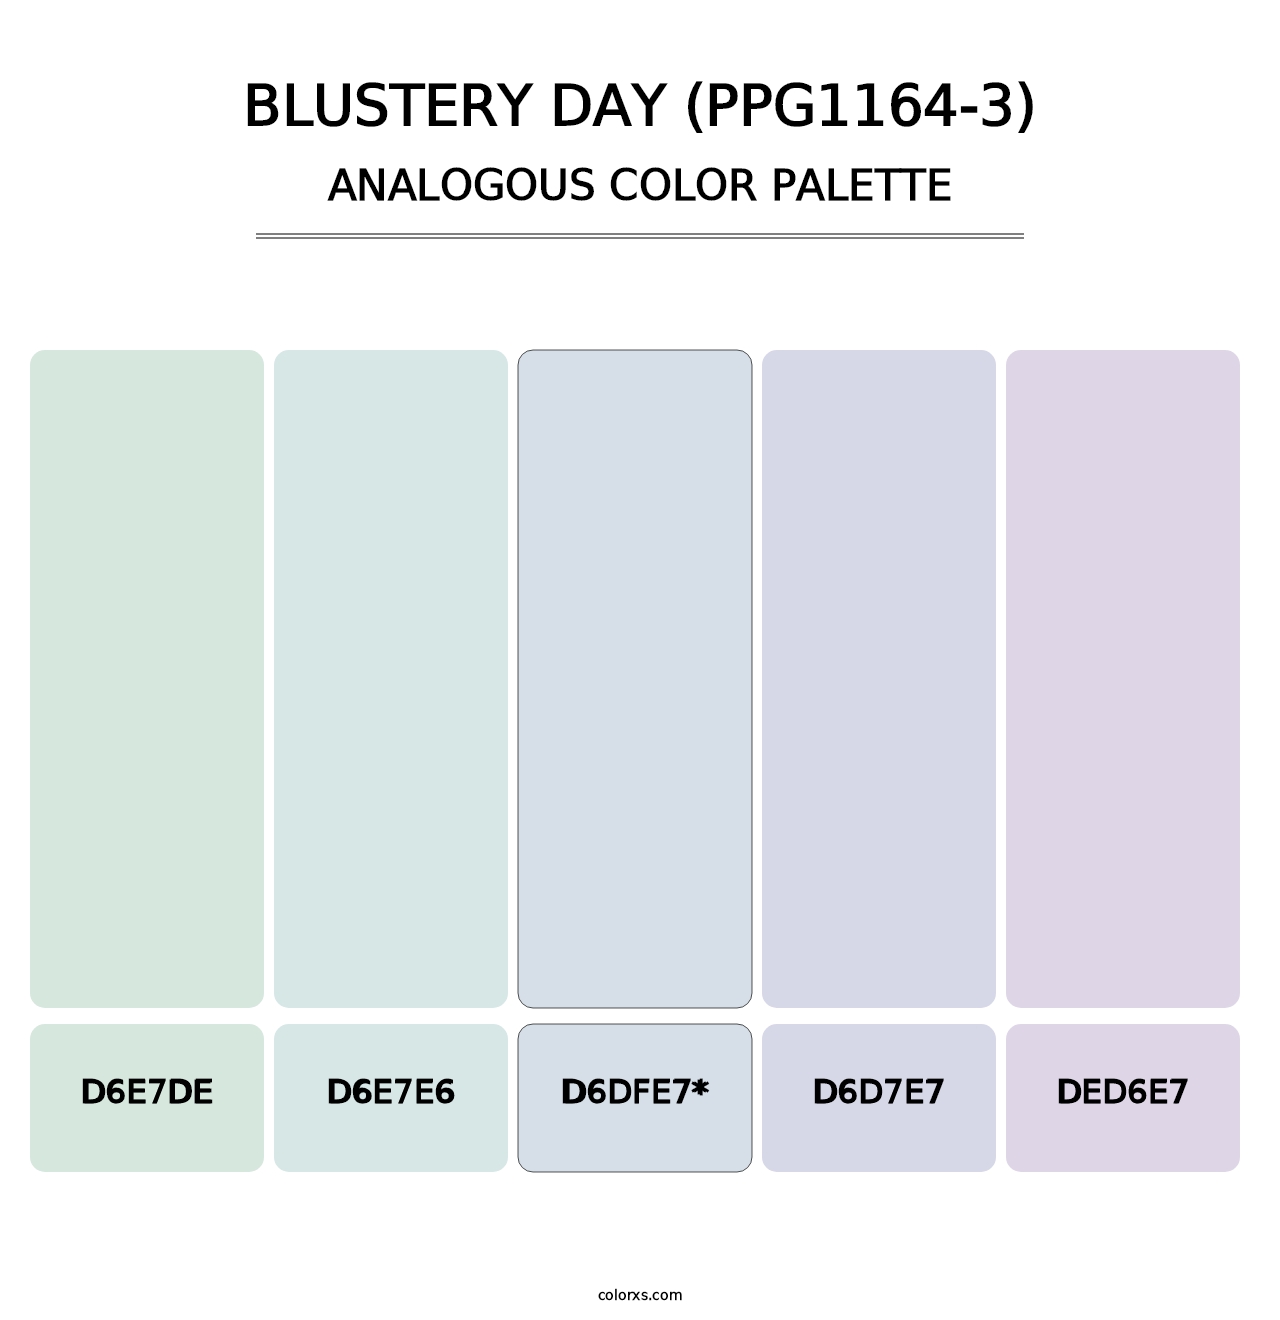 Blustery Day (PPG1164-3) - Analogous Color Palette